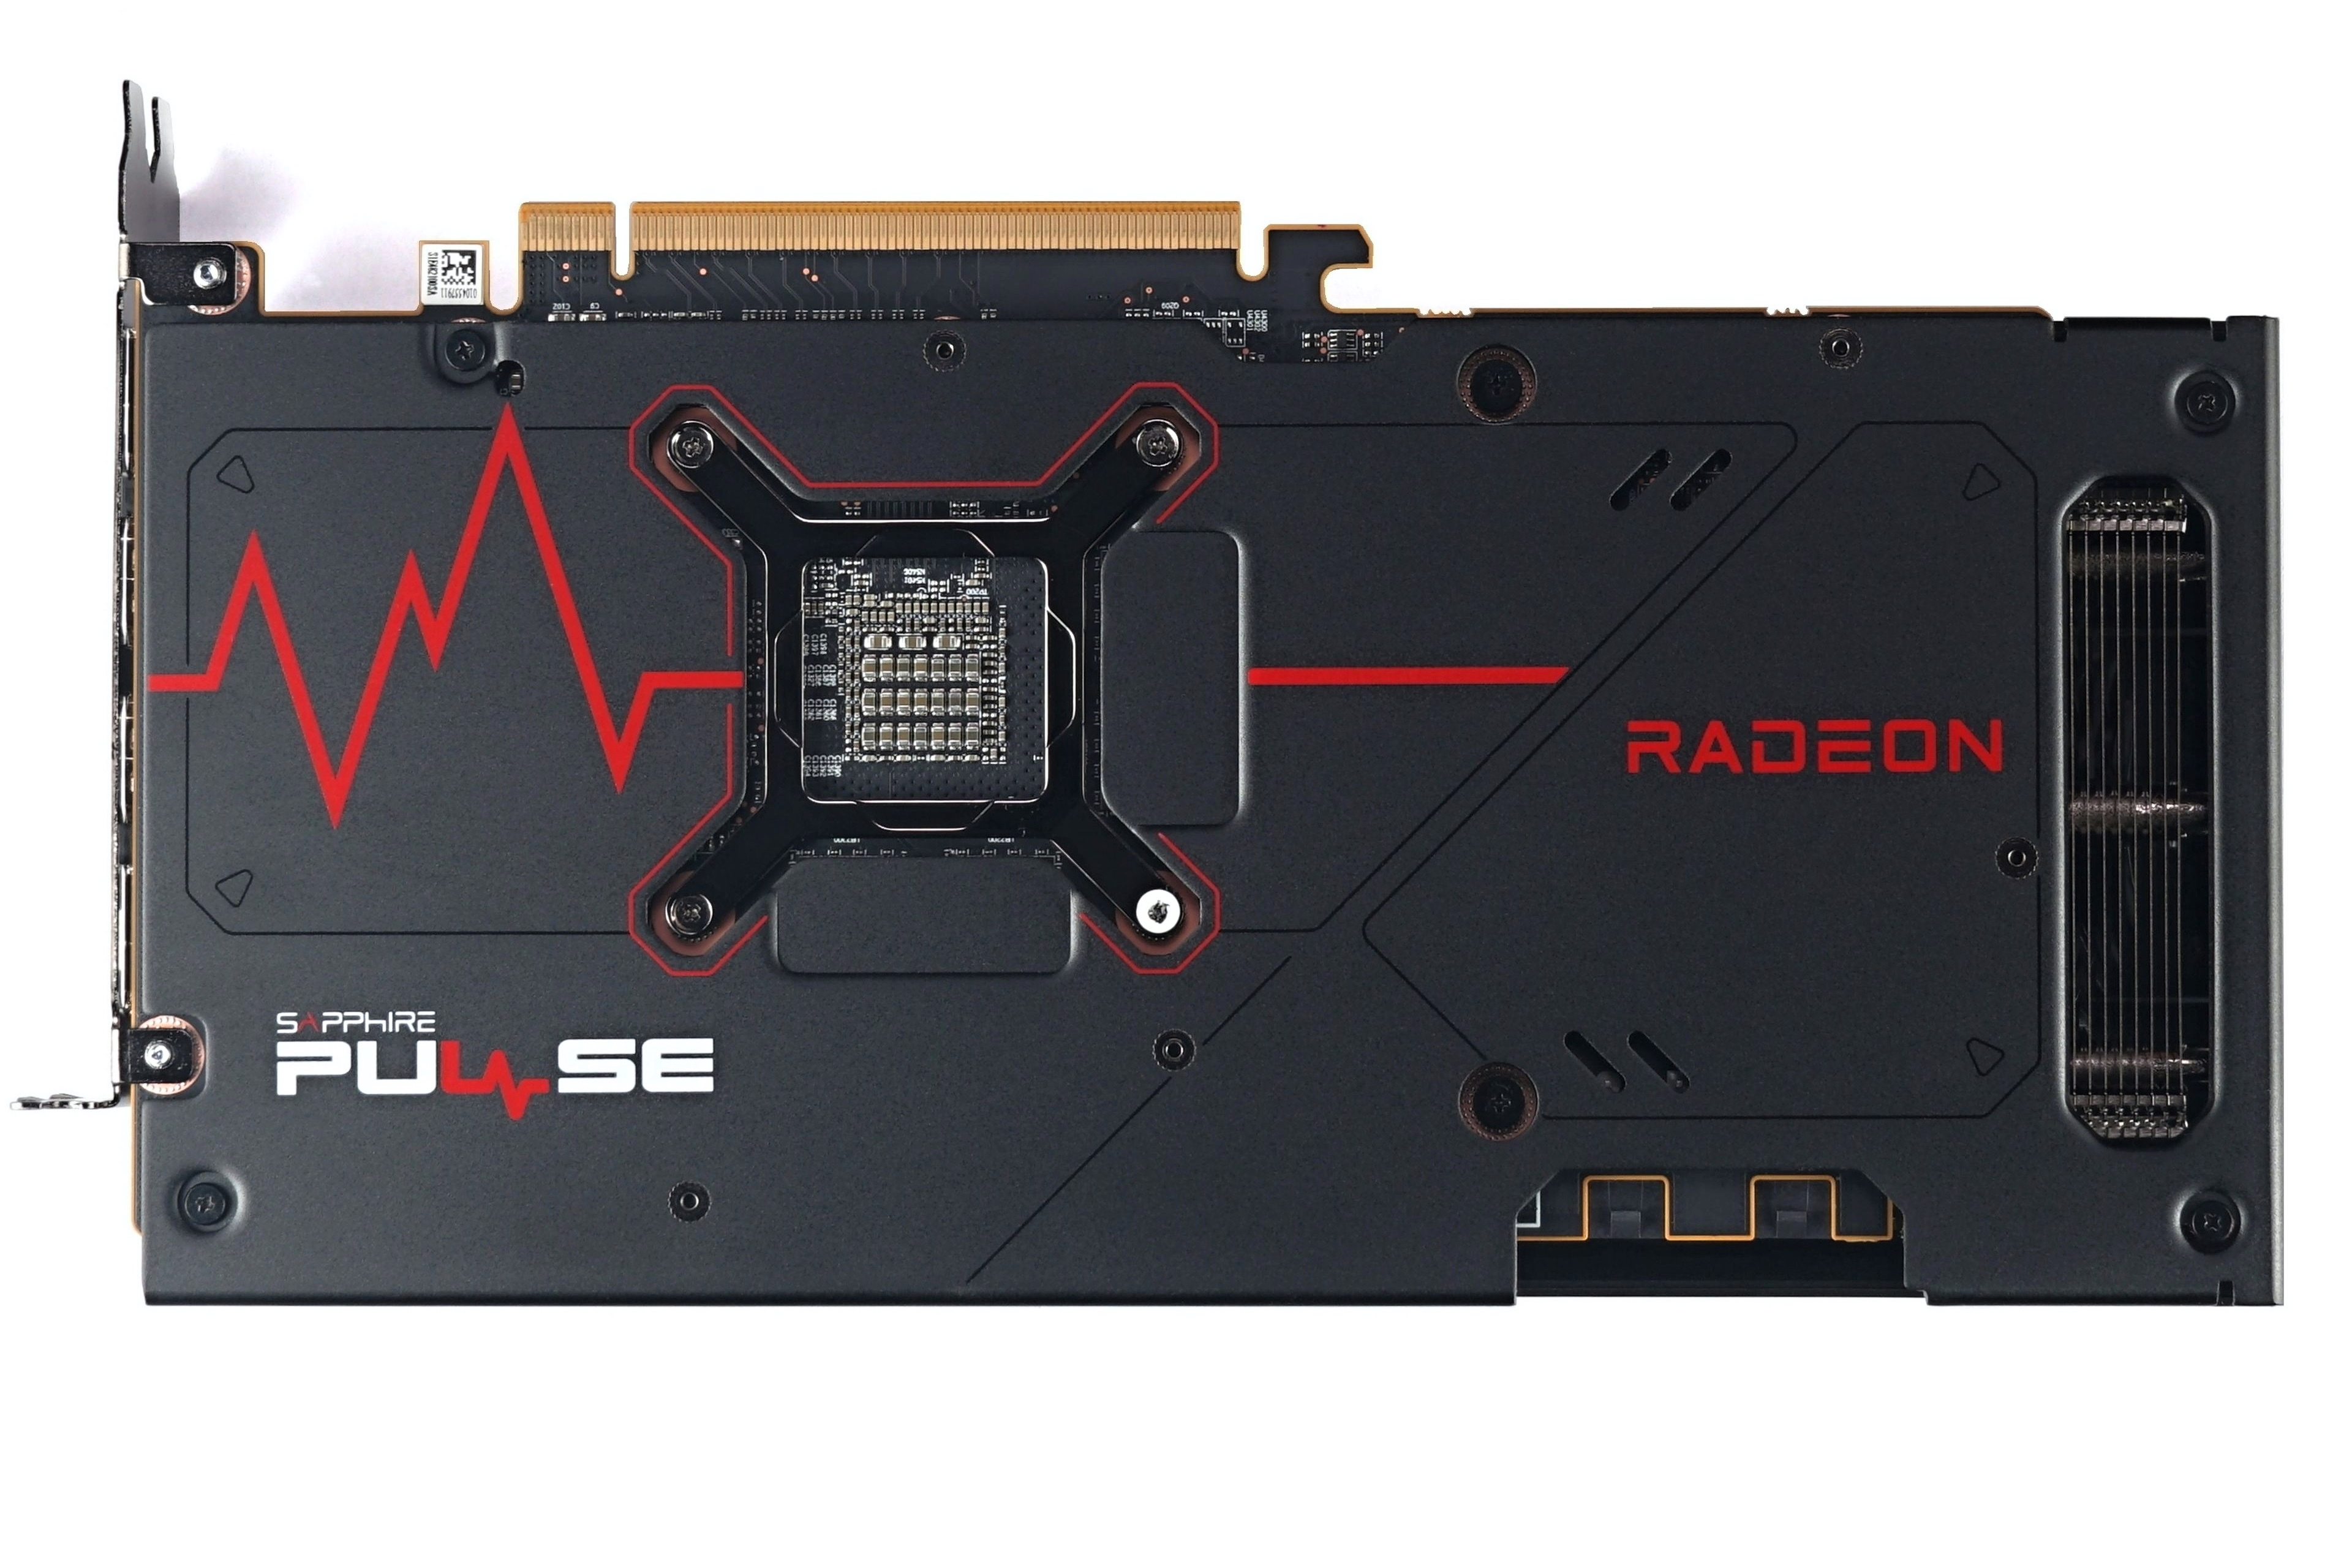 Sapphire RX 7600 XT Pulse or the cheapest 16 GB graphics card 